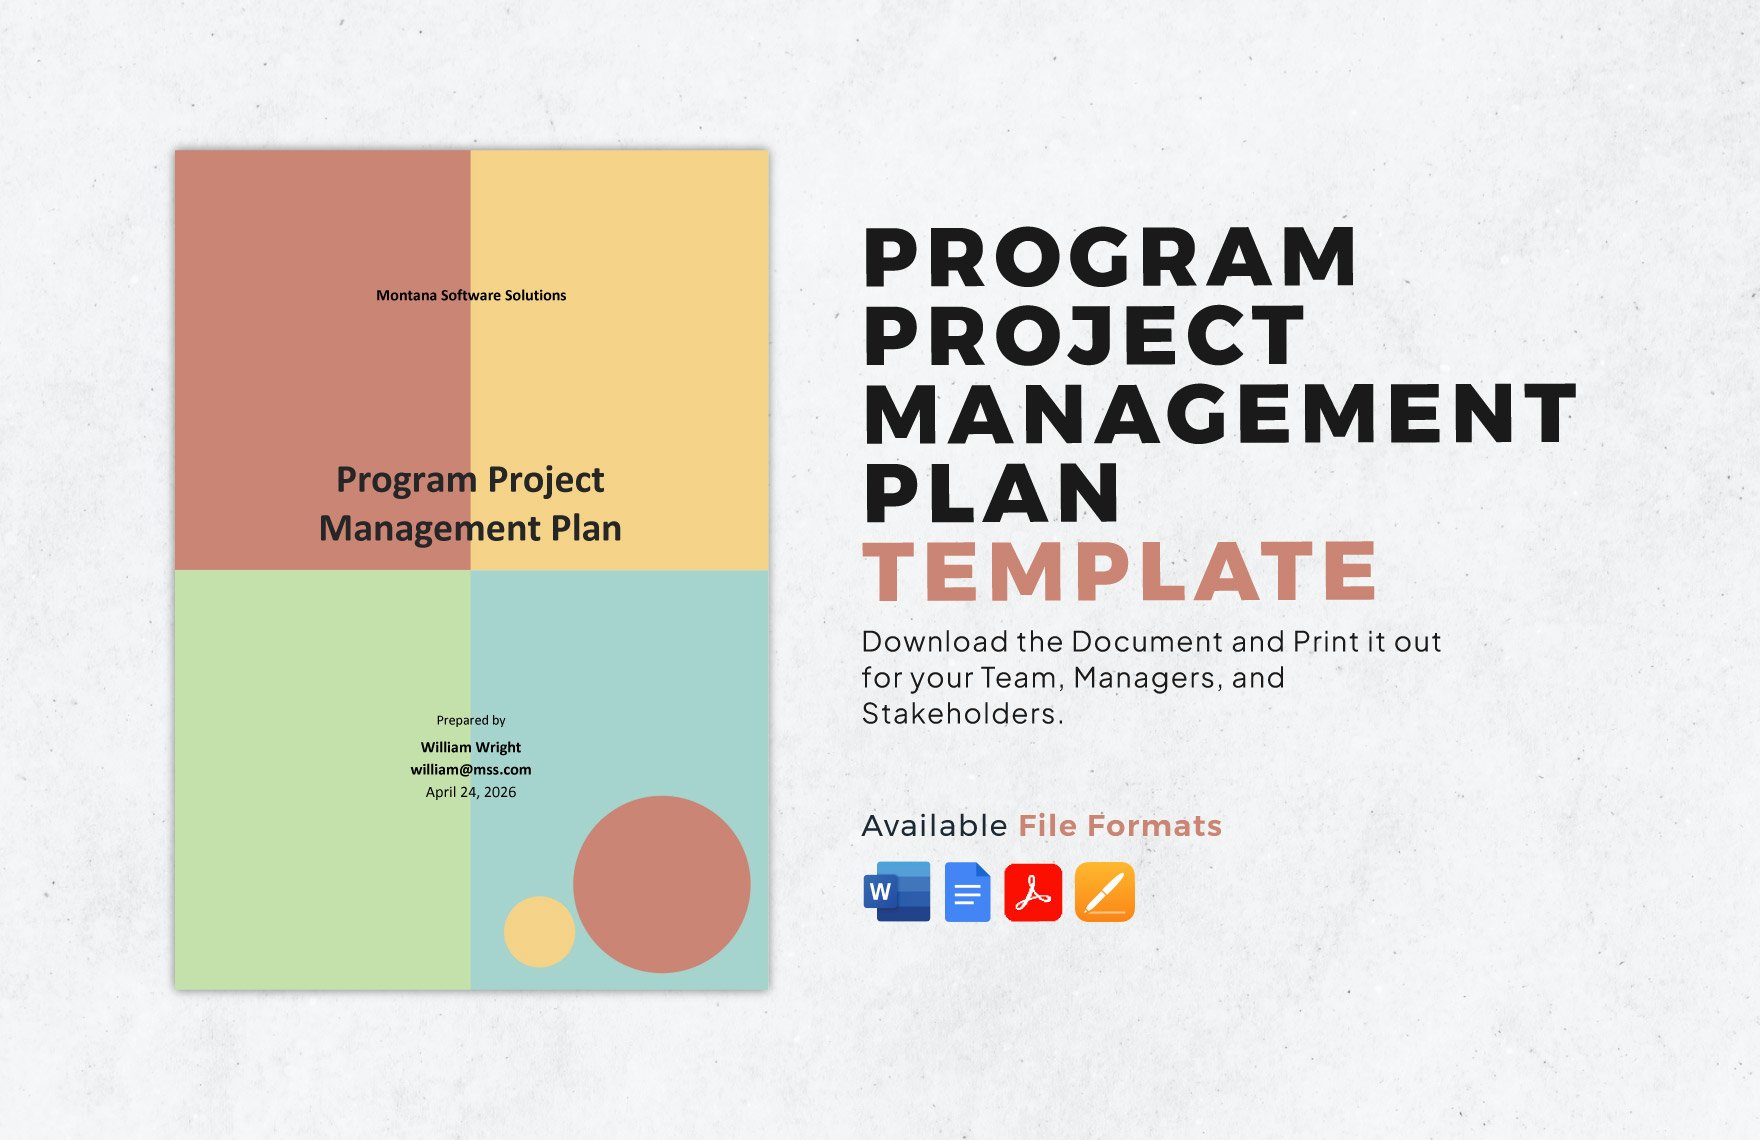 Program Project Management Plan Template in Word, Google Docs, PDF, Apple Pages